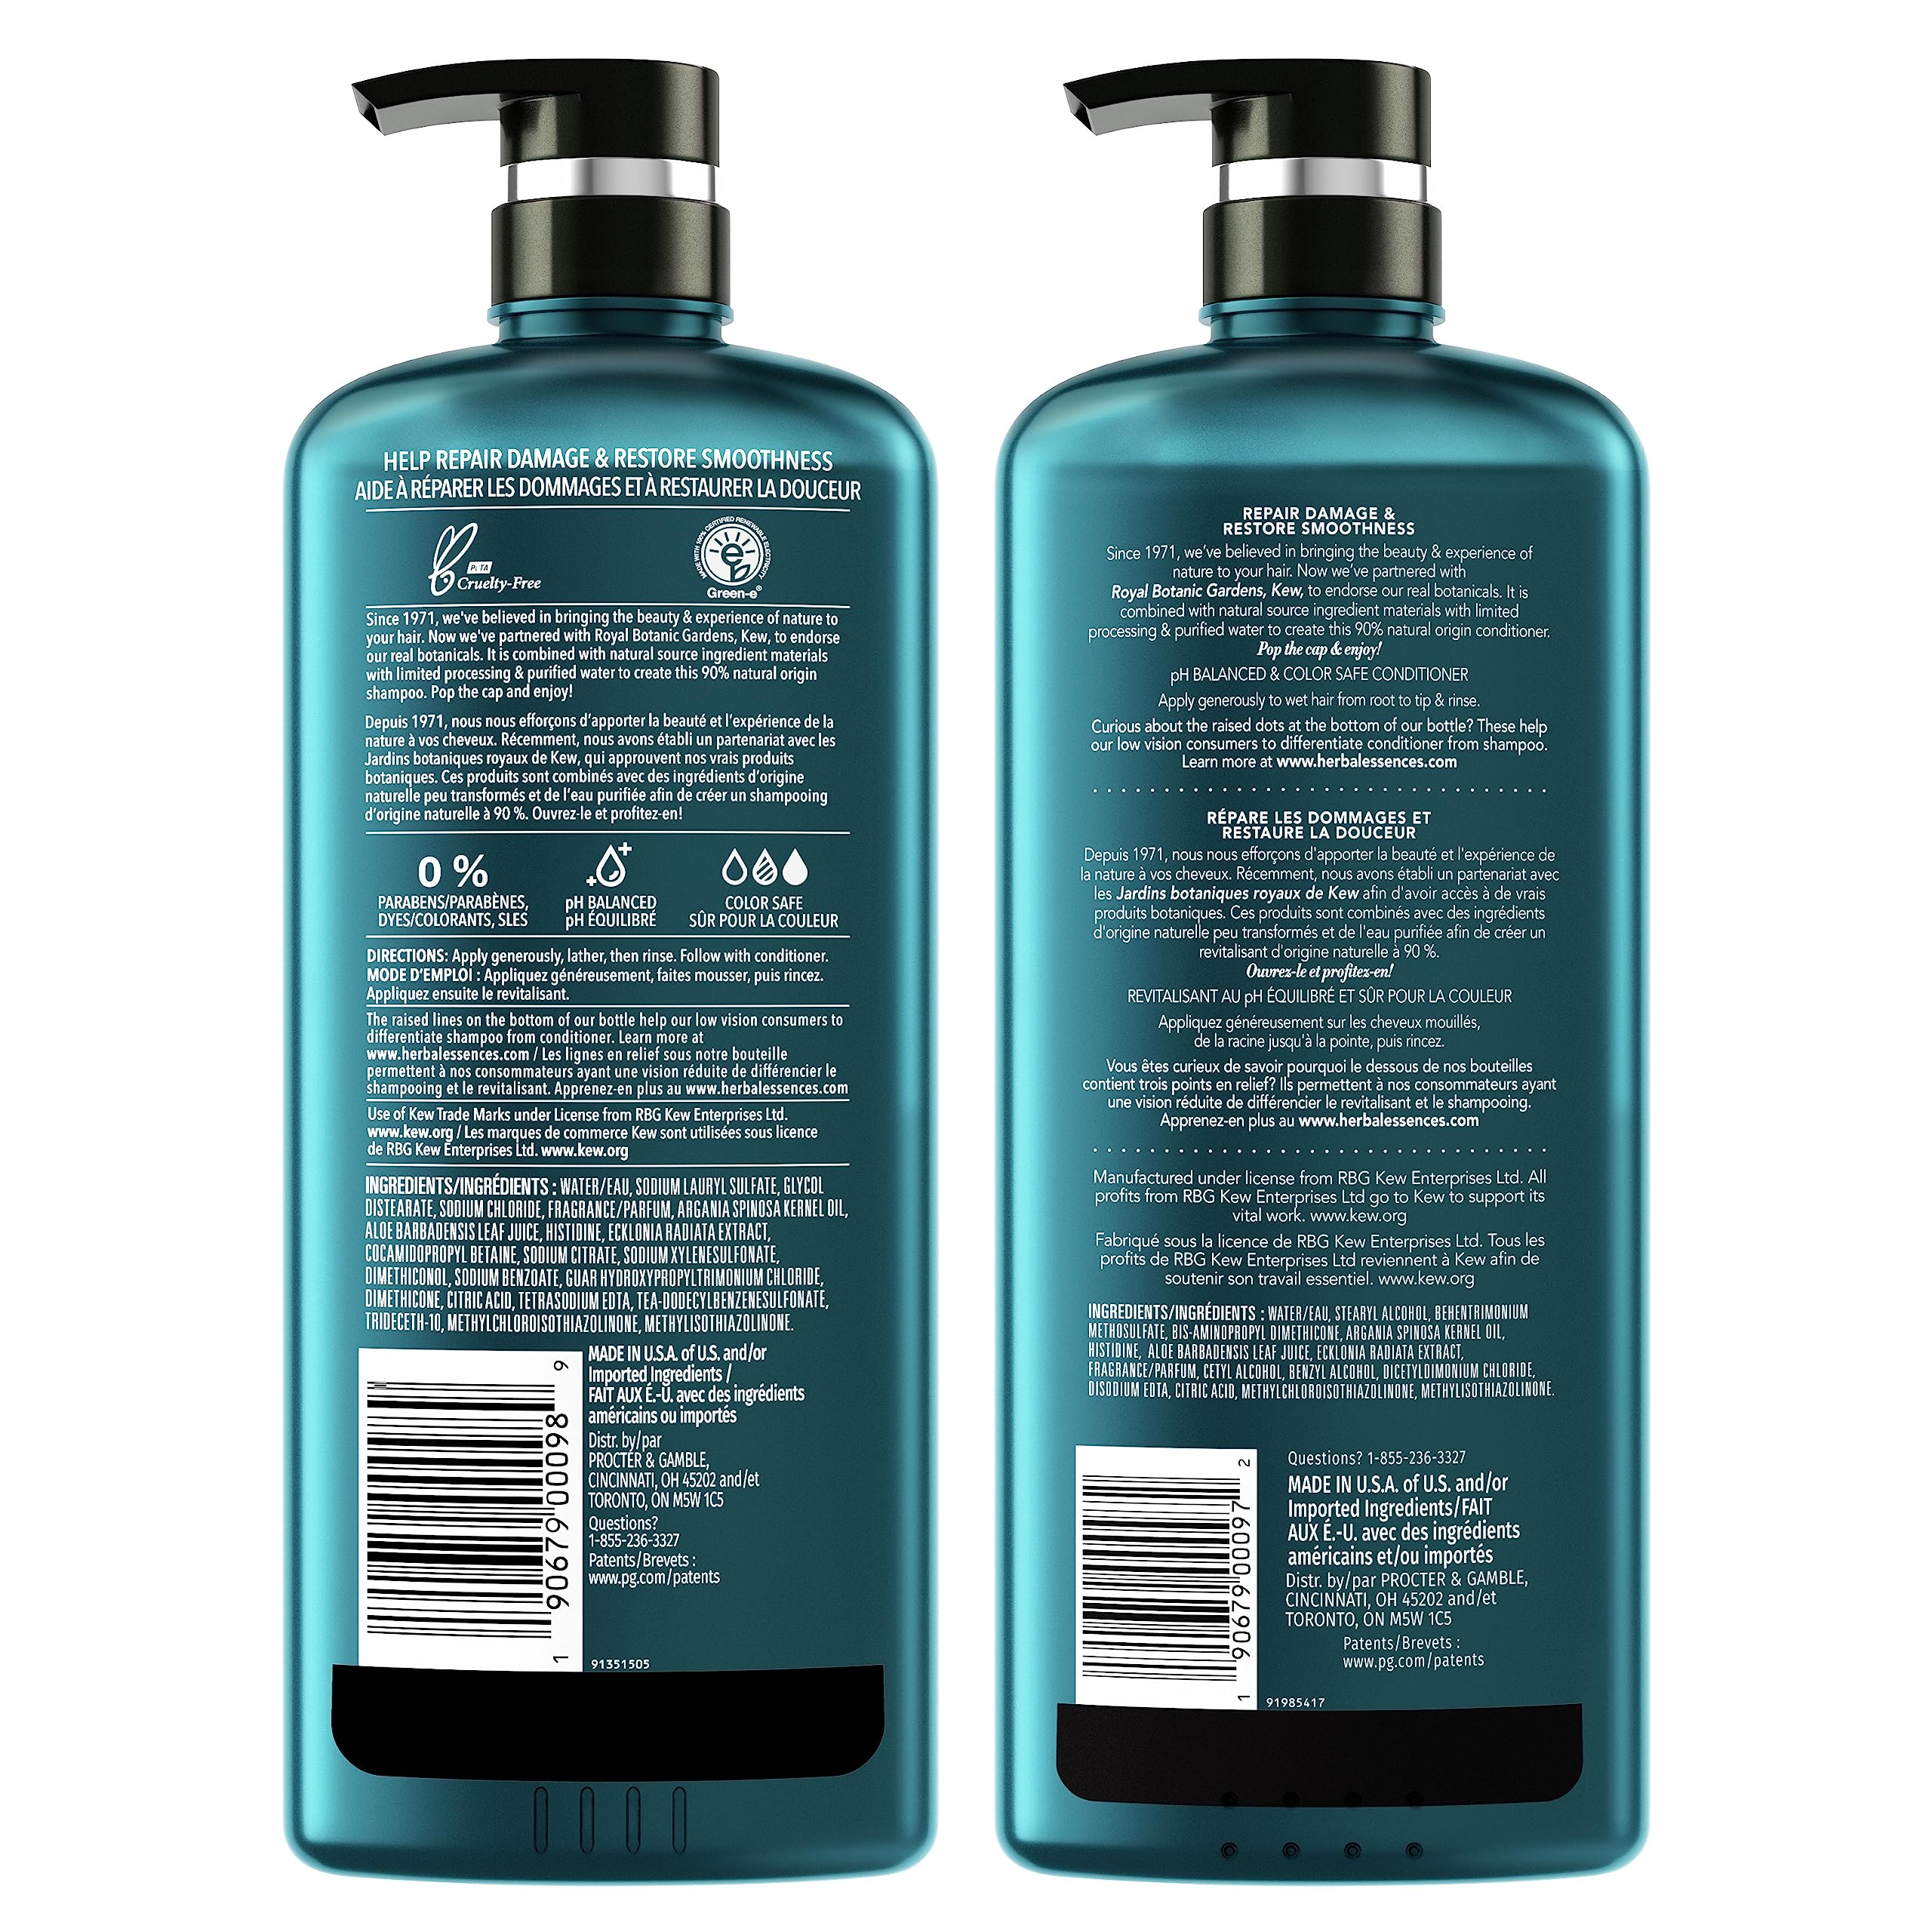 Herbal Essences Shampoo and Conditioner Set Repairing Argan Oil of Morocco with Natural Source Ingredients, Color Safe, BioRenew, 20.2 Fl Oz, 2 Count